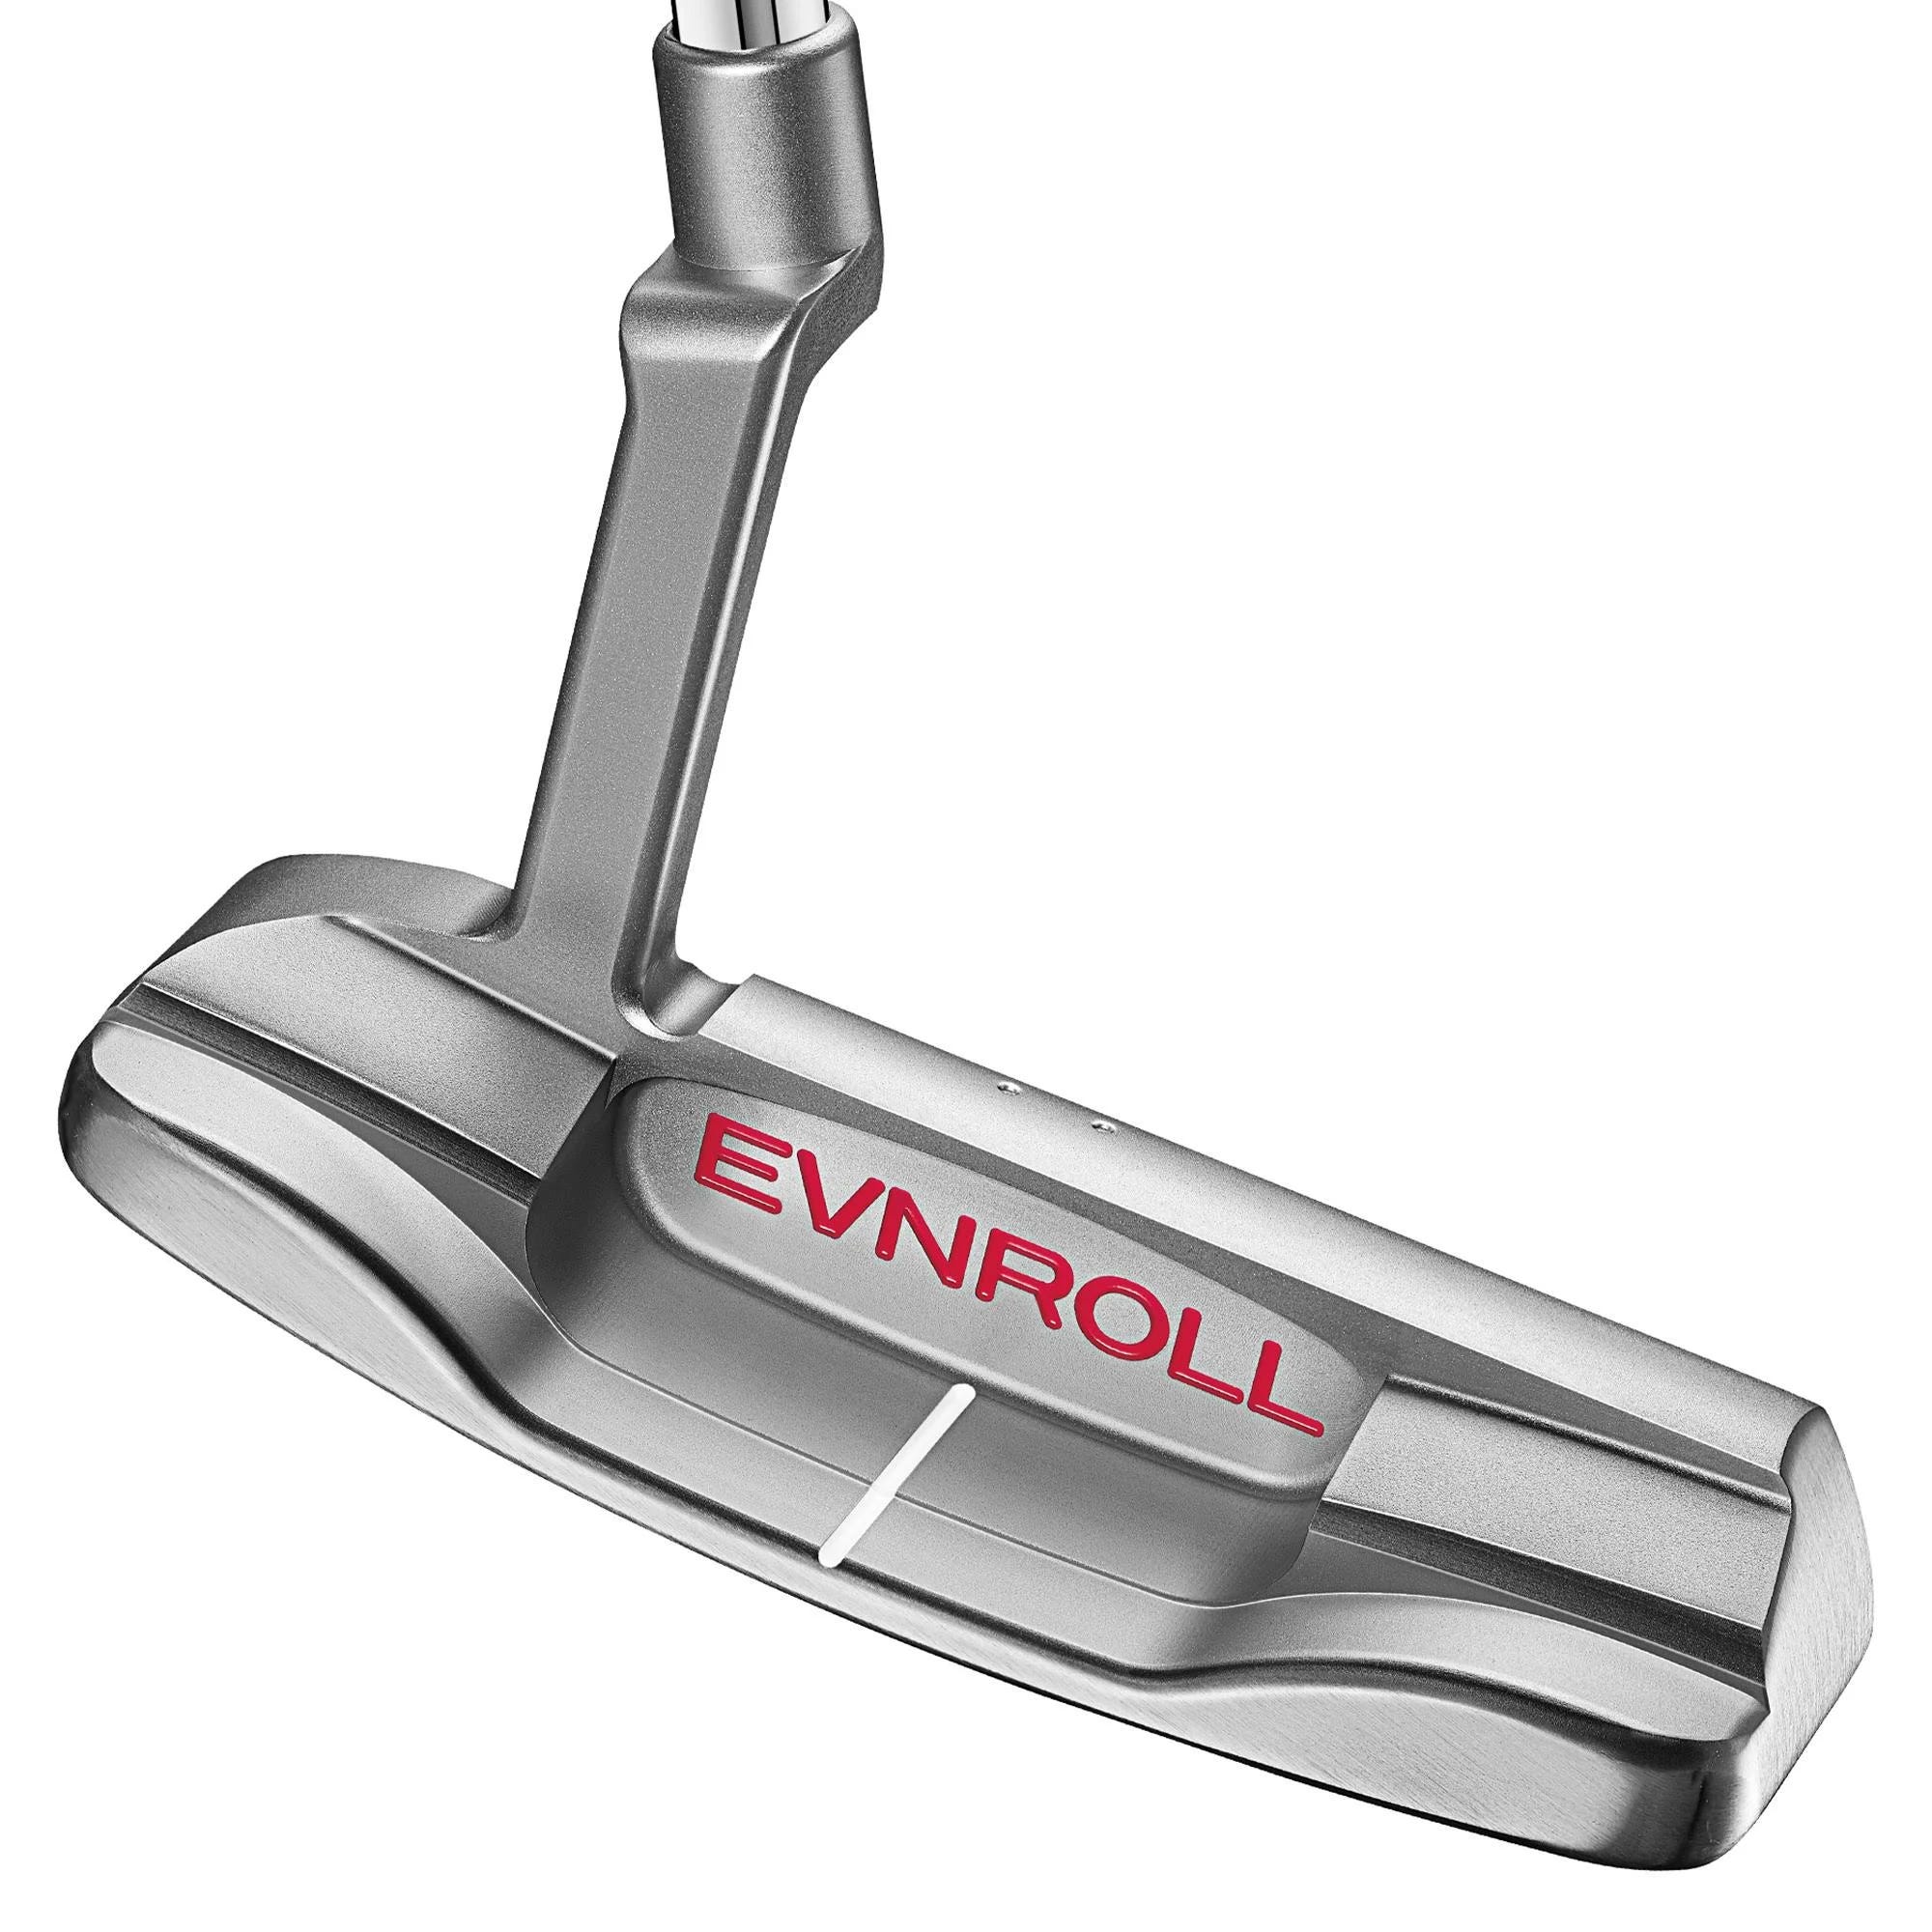 Evnroll ER1.2 TourBlade Putter - Improve Your Putting Game with Enhanced Sweet Spot and Exceptional Feel | Image